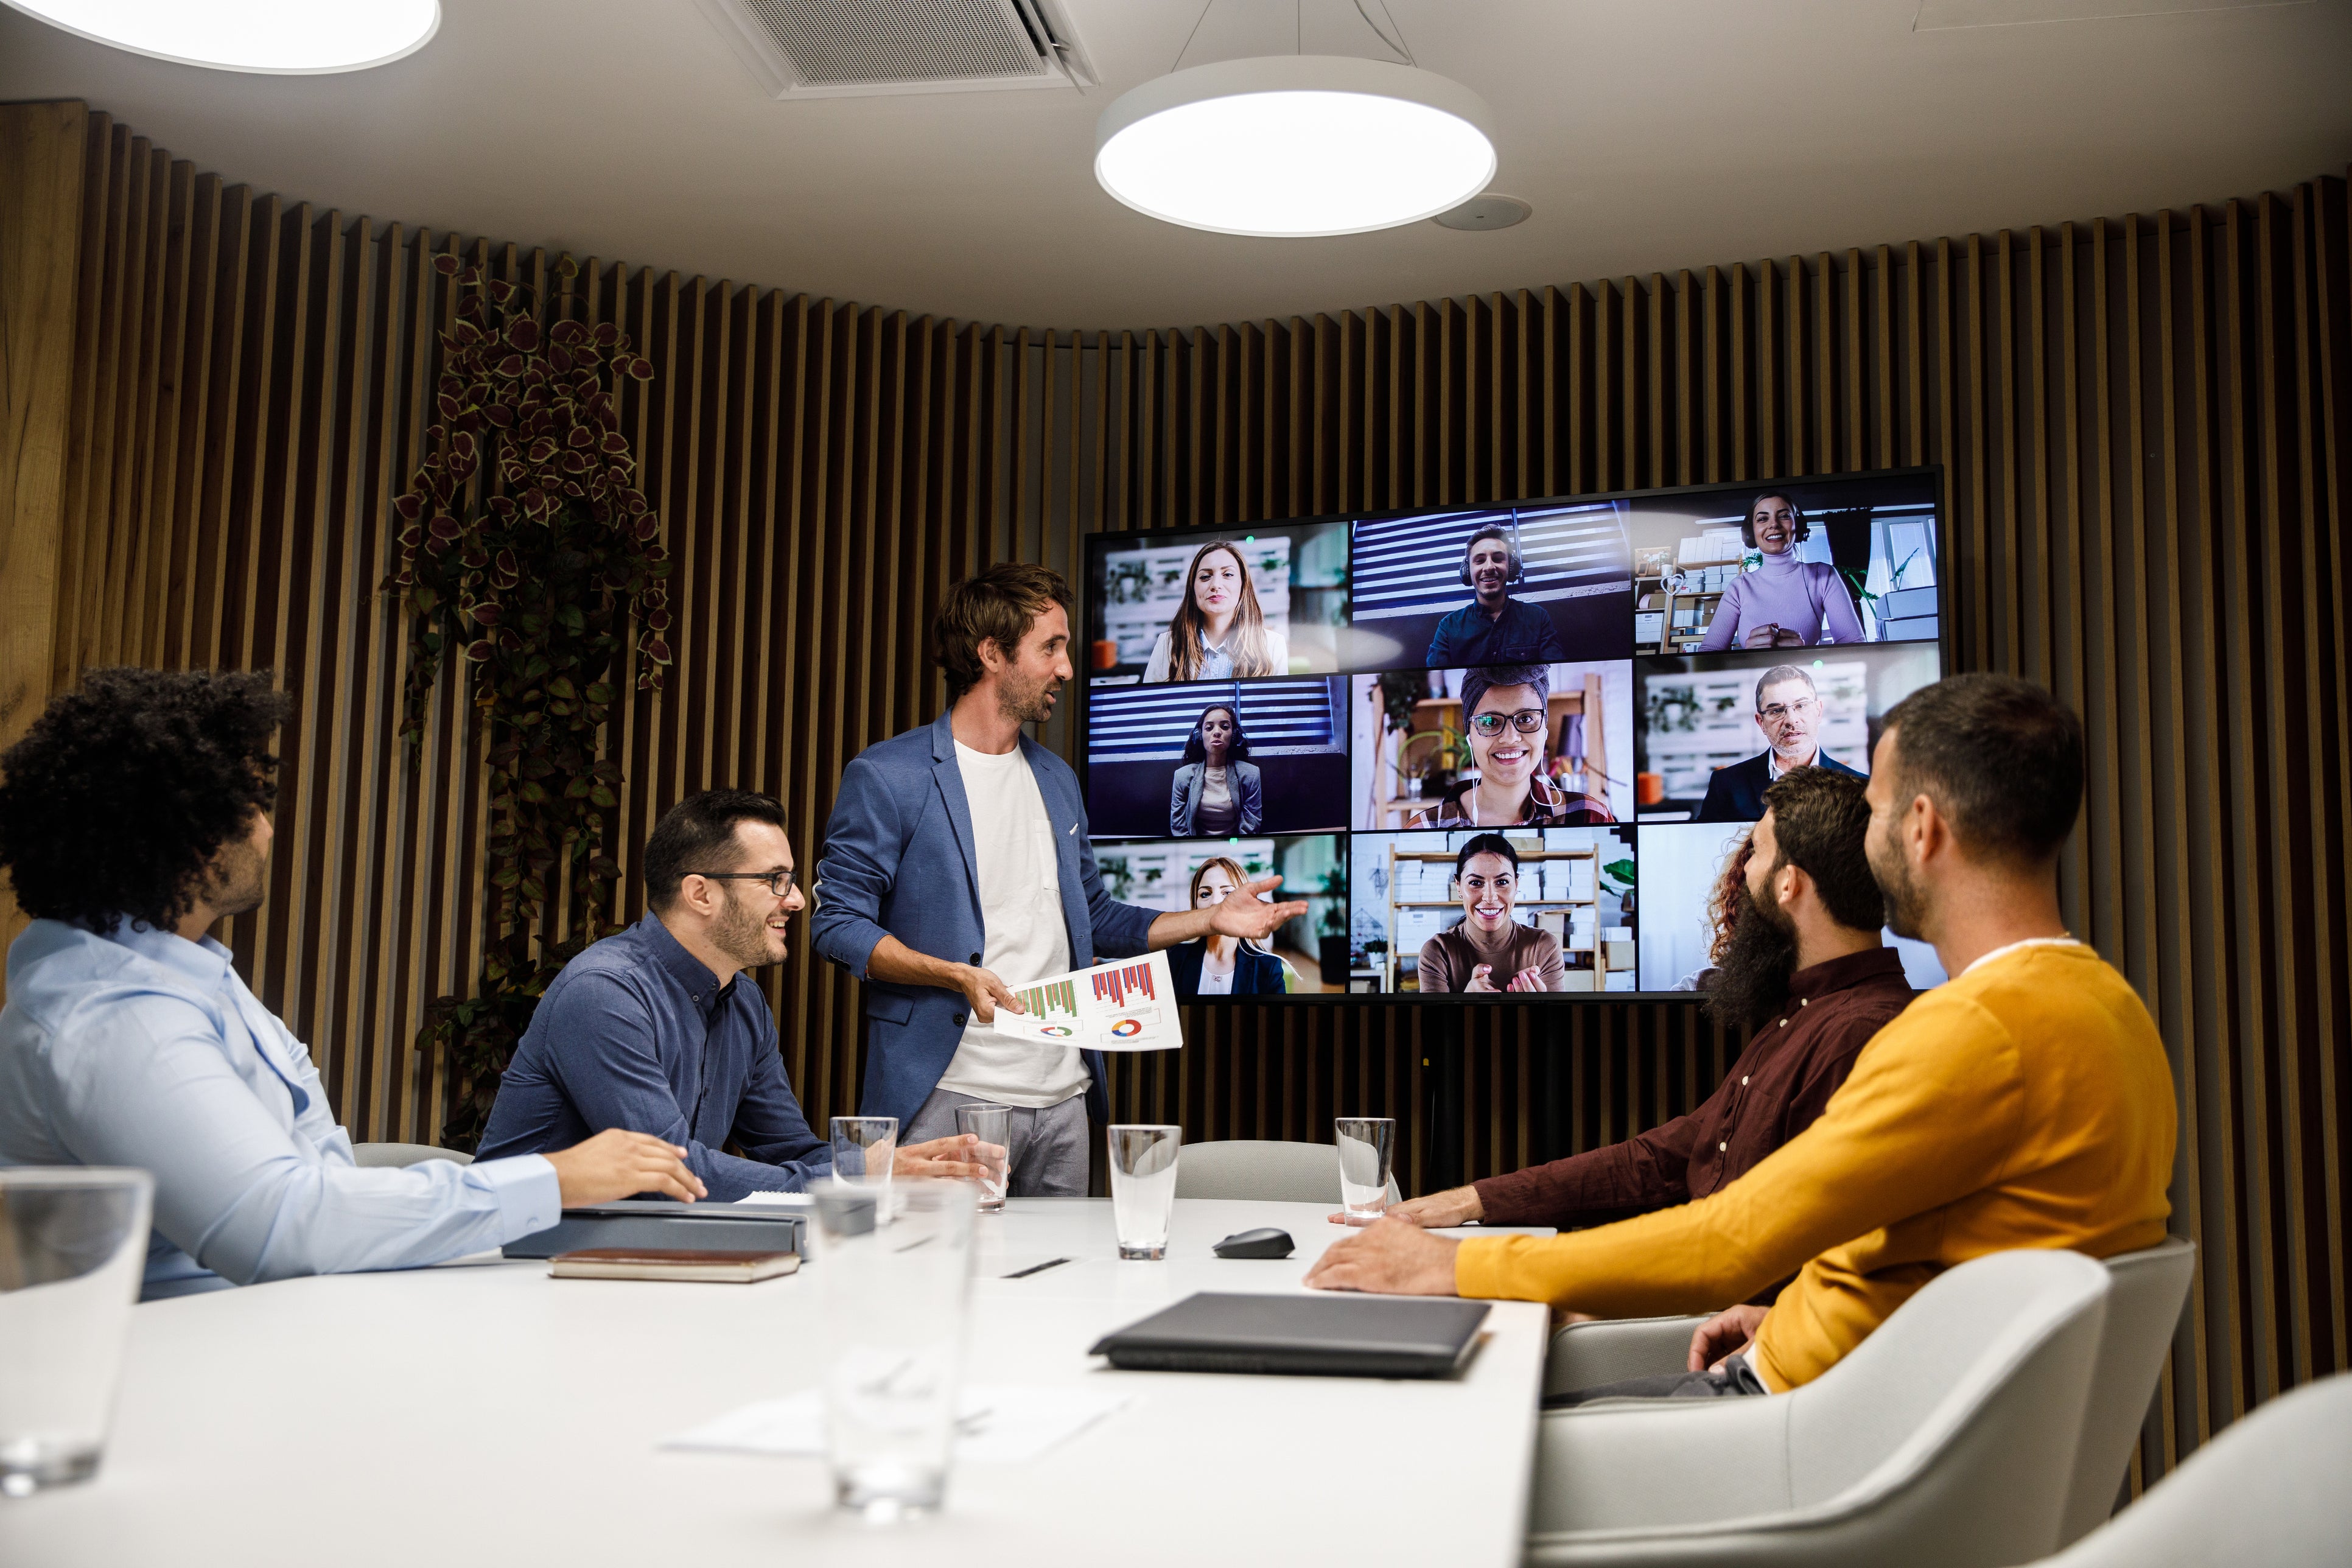 Closing the gap: With the right technology, attending a meeting online can be as rich an experience as attending in person